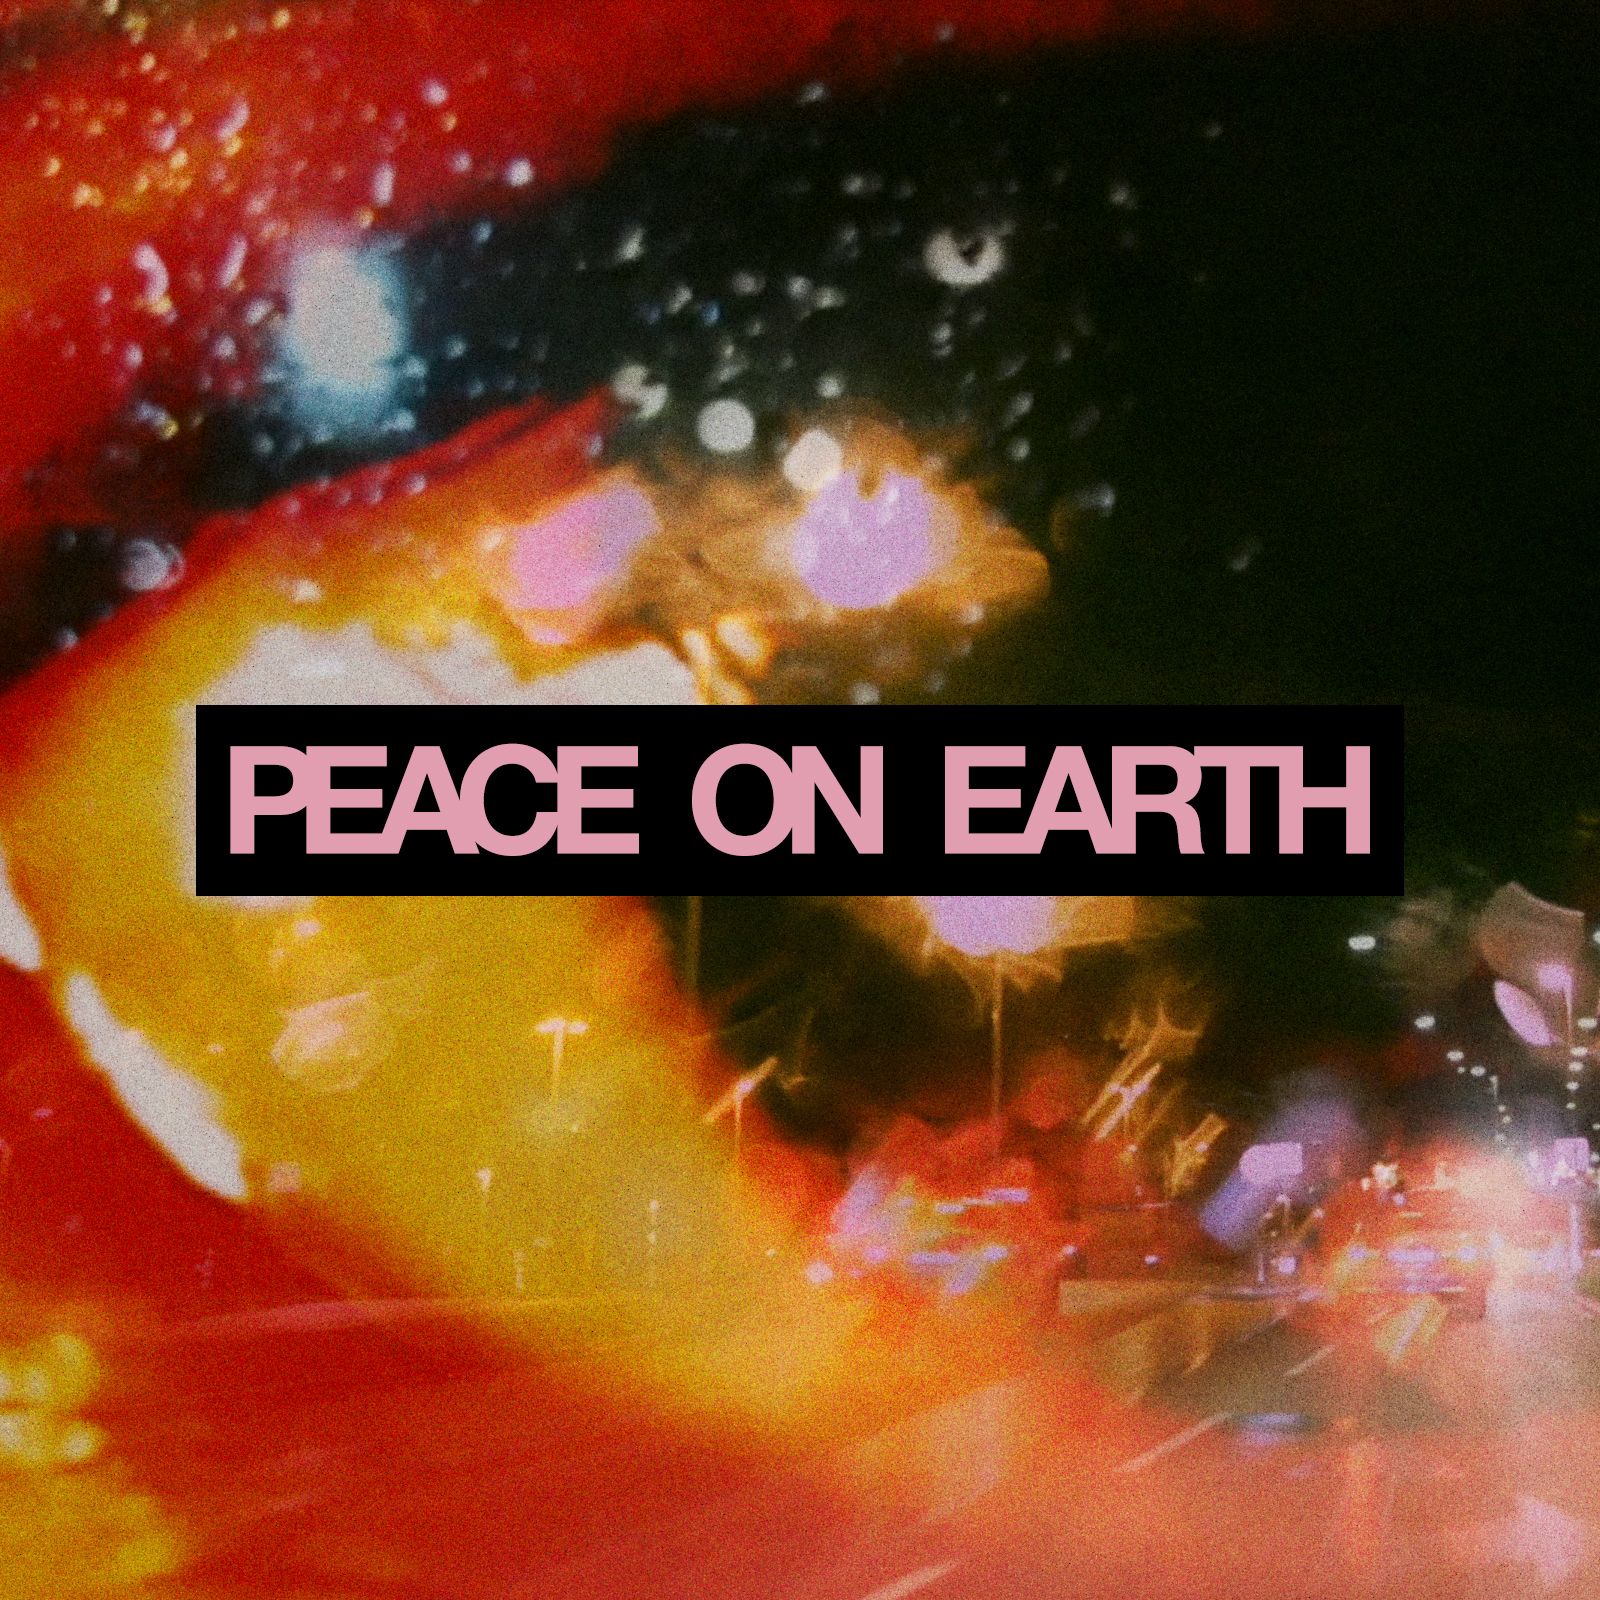 Peace on Earth – “Where We Are”